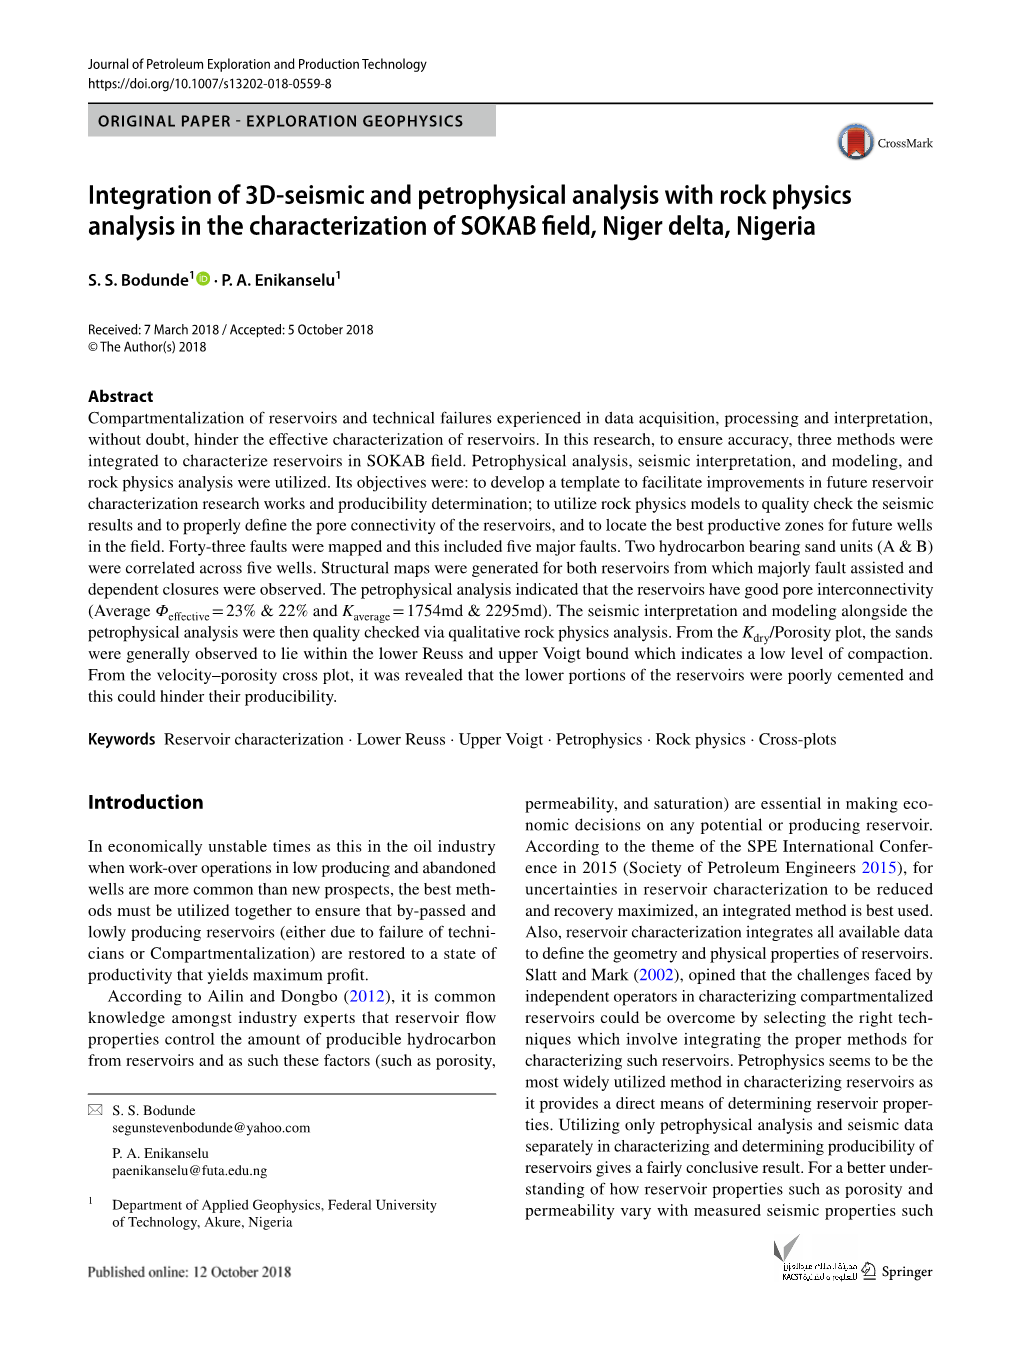 Integration of 3D-Seismic and Petrophysical Analysis with Rock Physics Analysis in the Characterization of SOKAB Field, Niger Delta, Nigeria